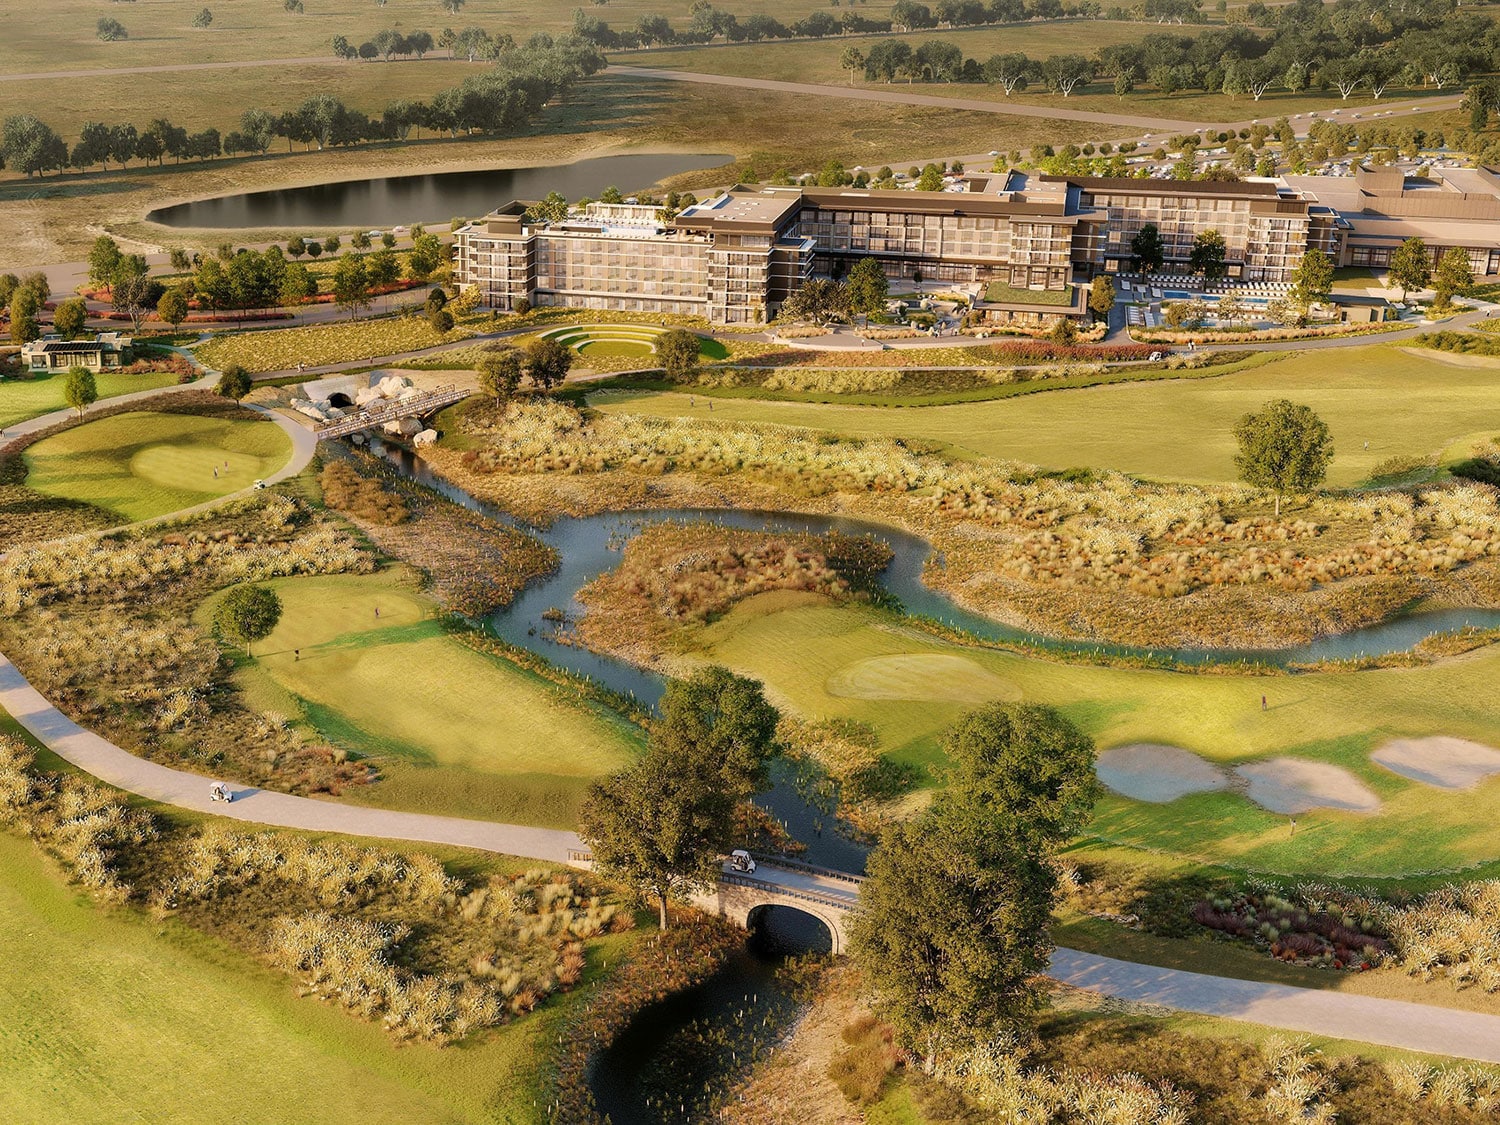 A digital rendering of an aerial view of some golf holes at the Omni PGA Frisco Resort in Texas.